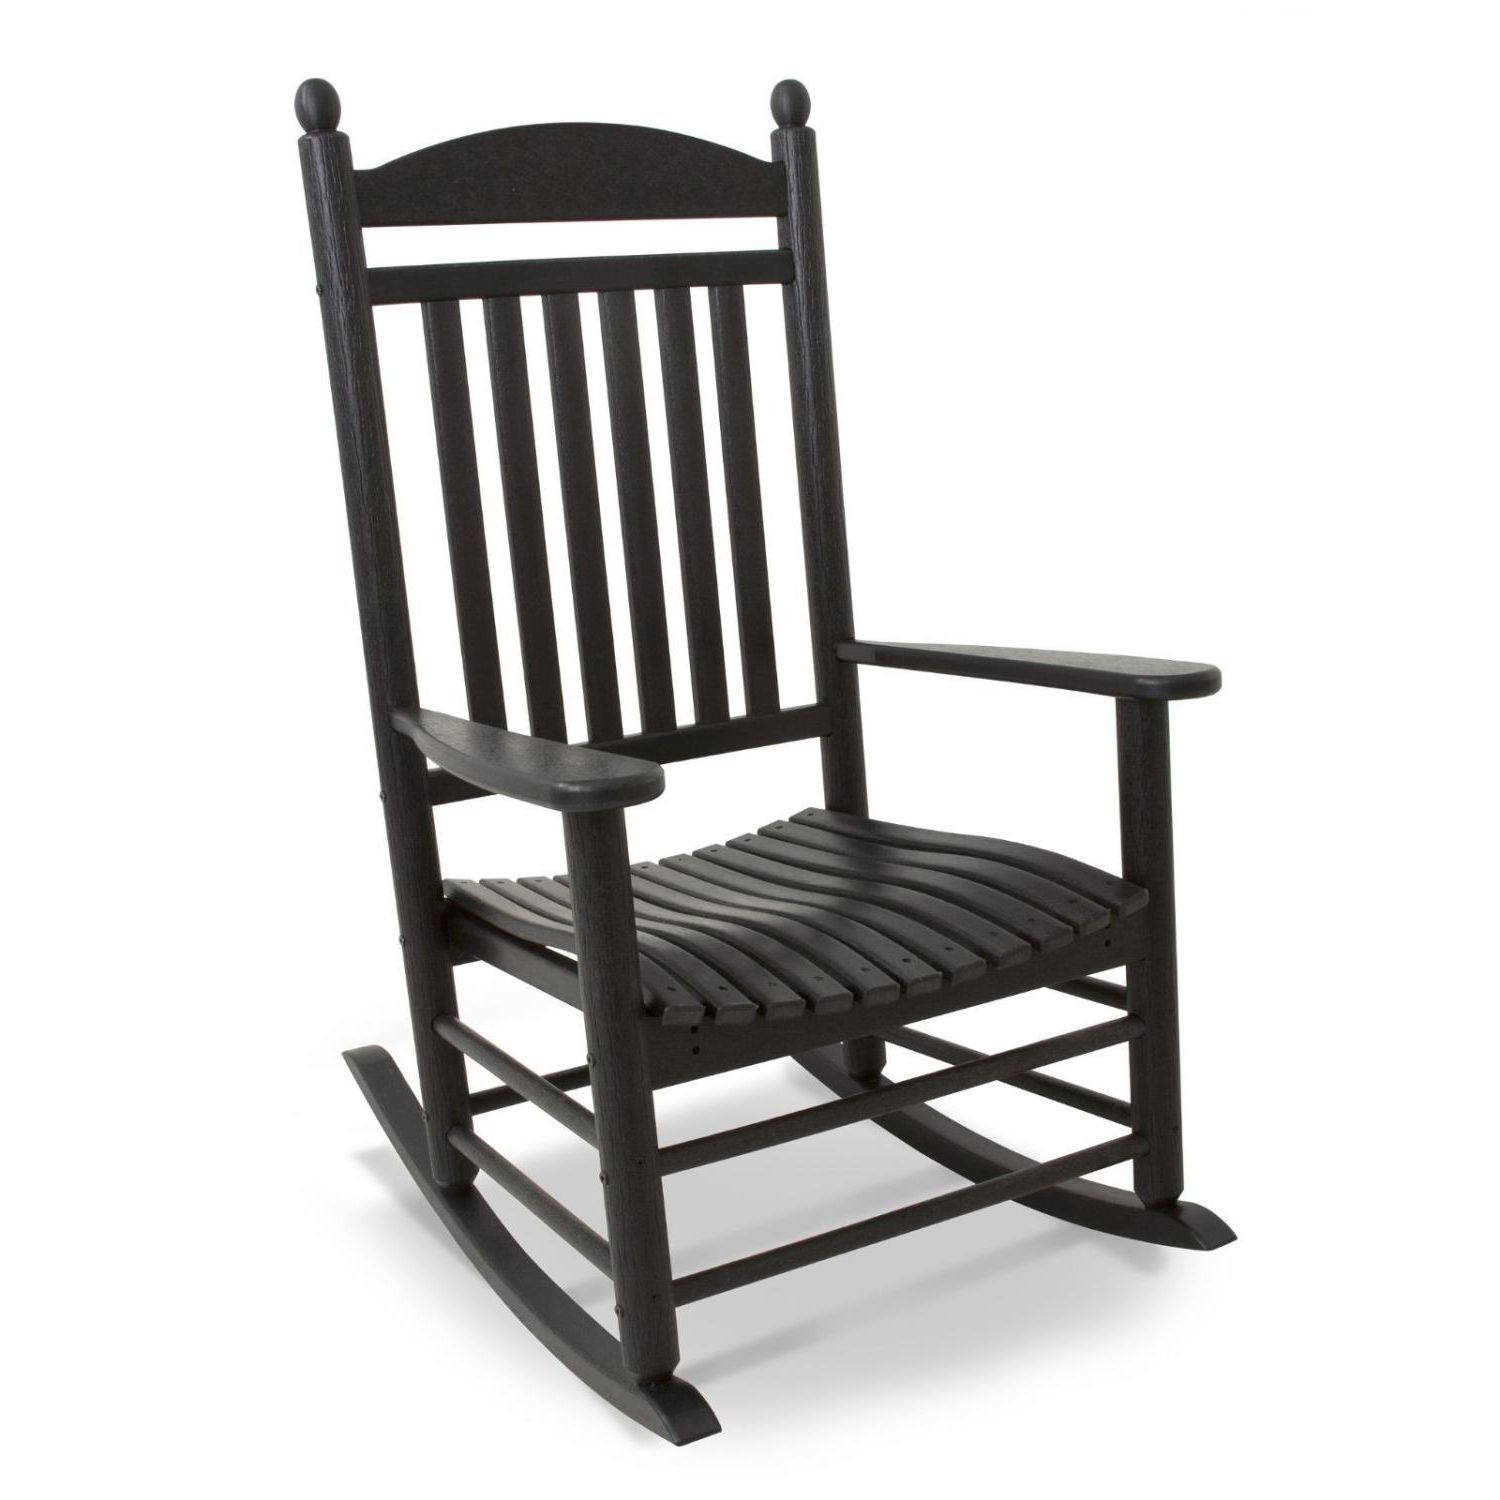 Most Popular Polywood Jefferson 3 Piece Recycled Plastic Wood Patio Rocking Chair For Plastic Patio Rocking Chairs (View 11 of 15)